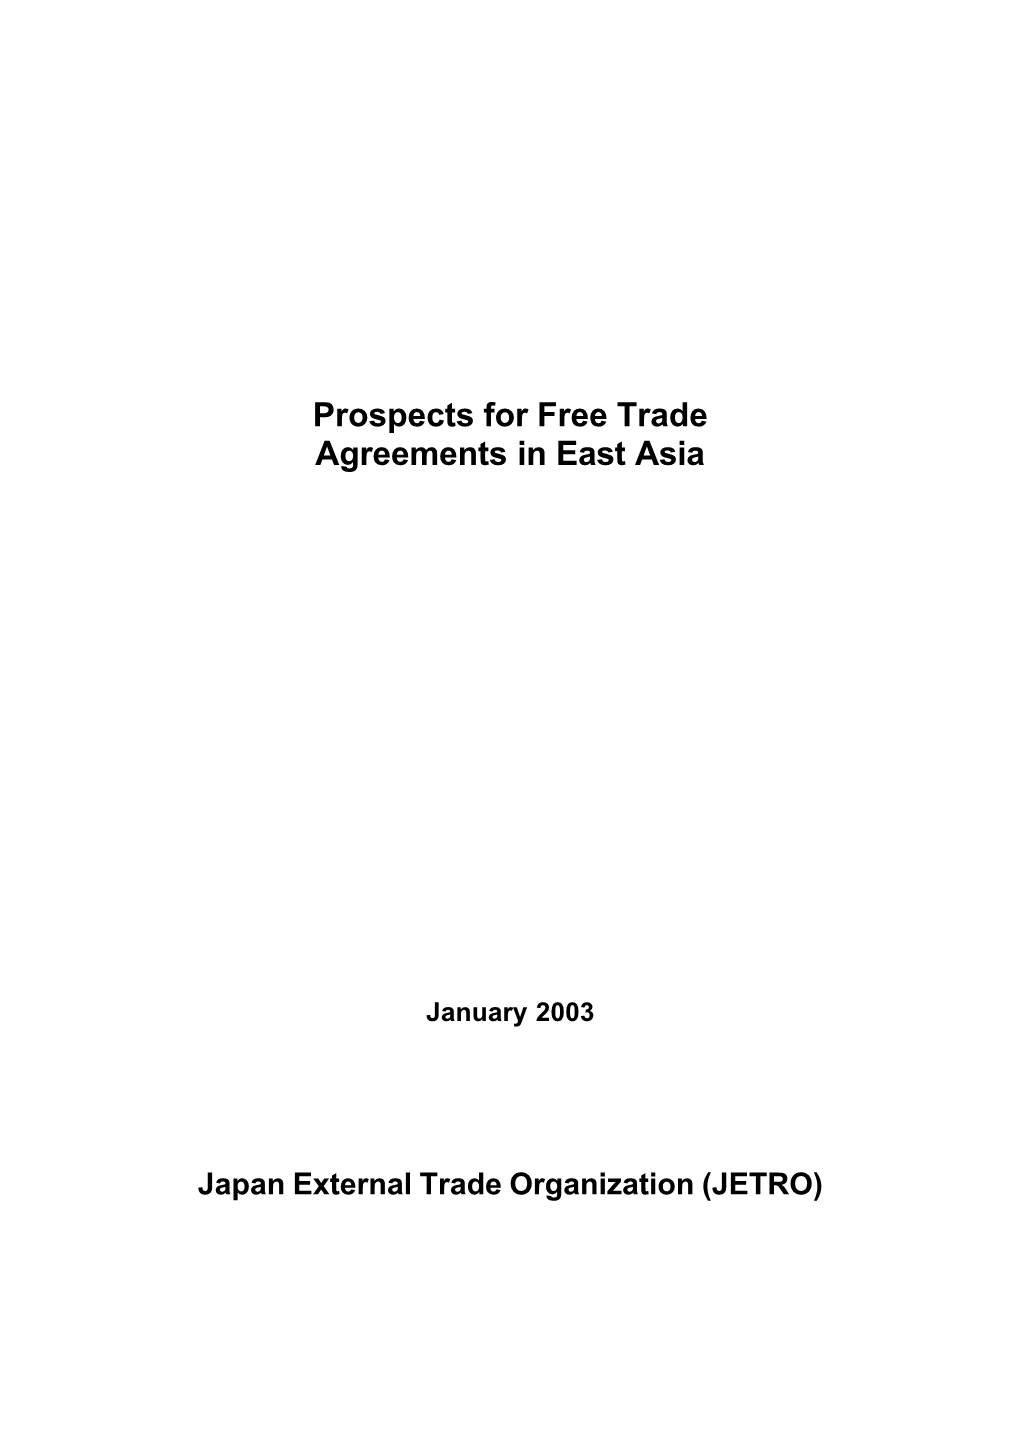 Prospects for Free Trade Agreements in East Asia